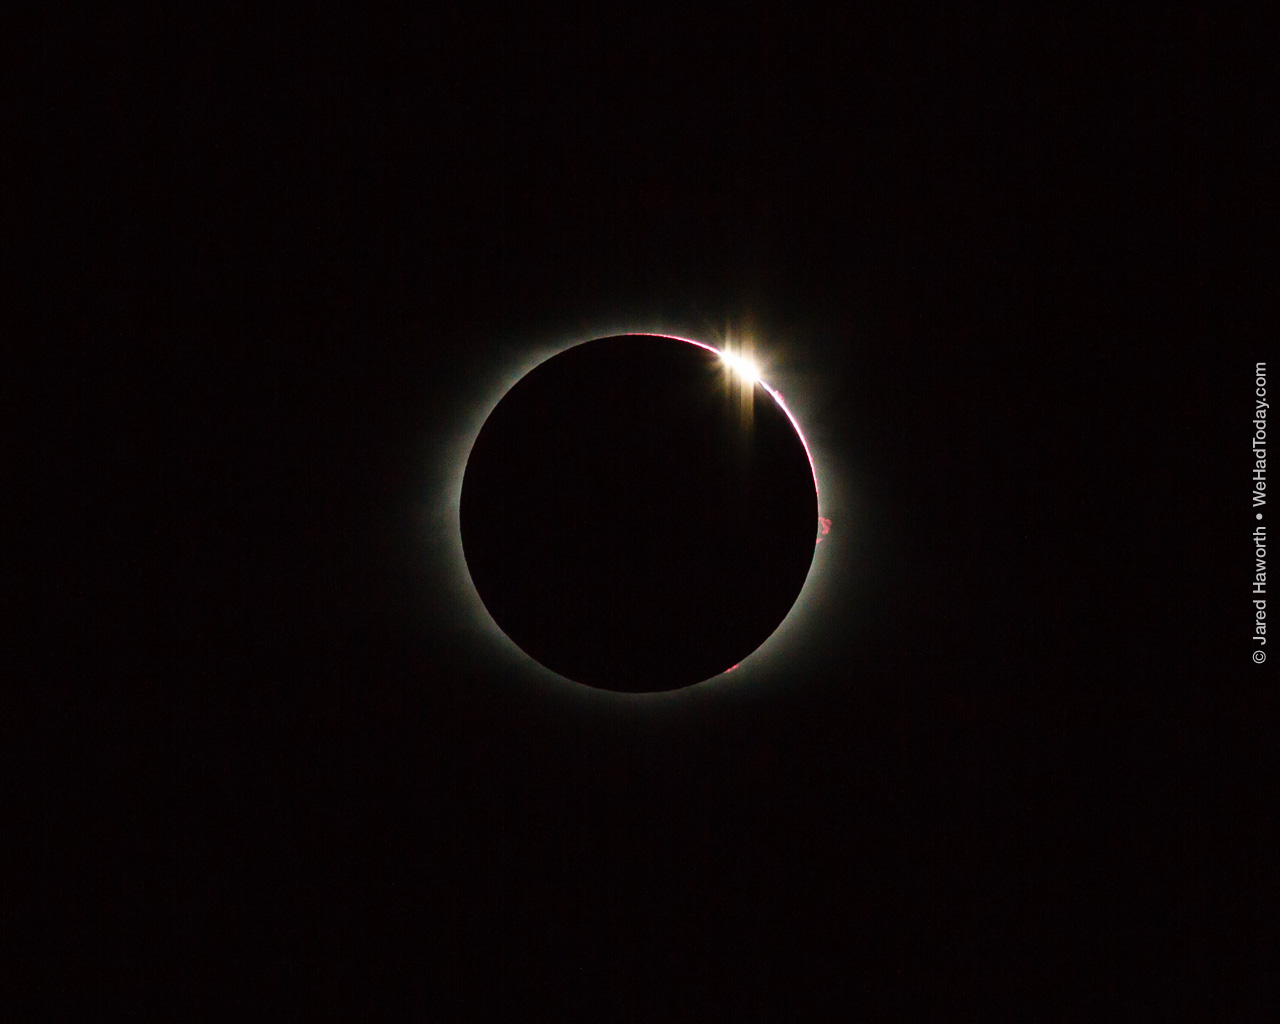 The second of the "diamond ring" phases of totality, as the moon begins to clear the face of the sun.